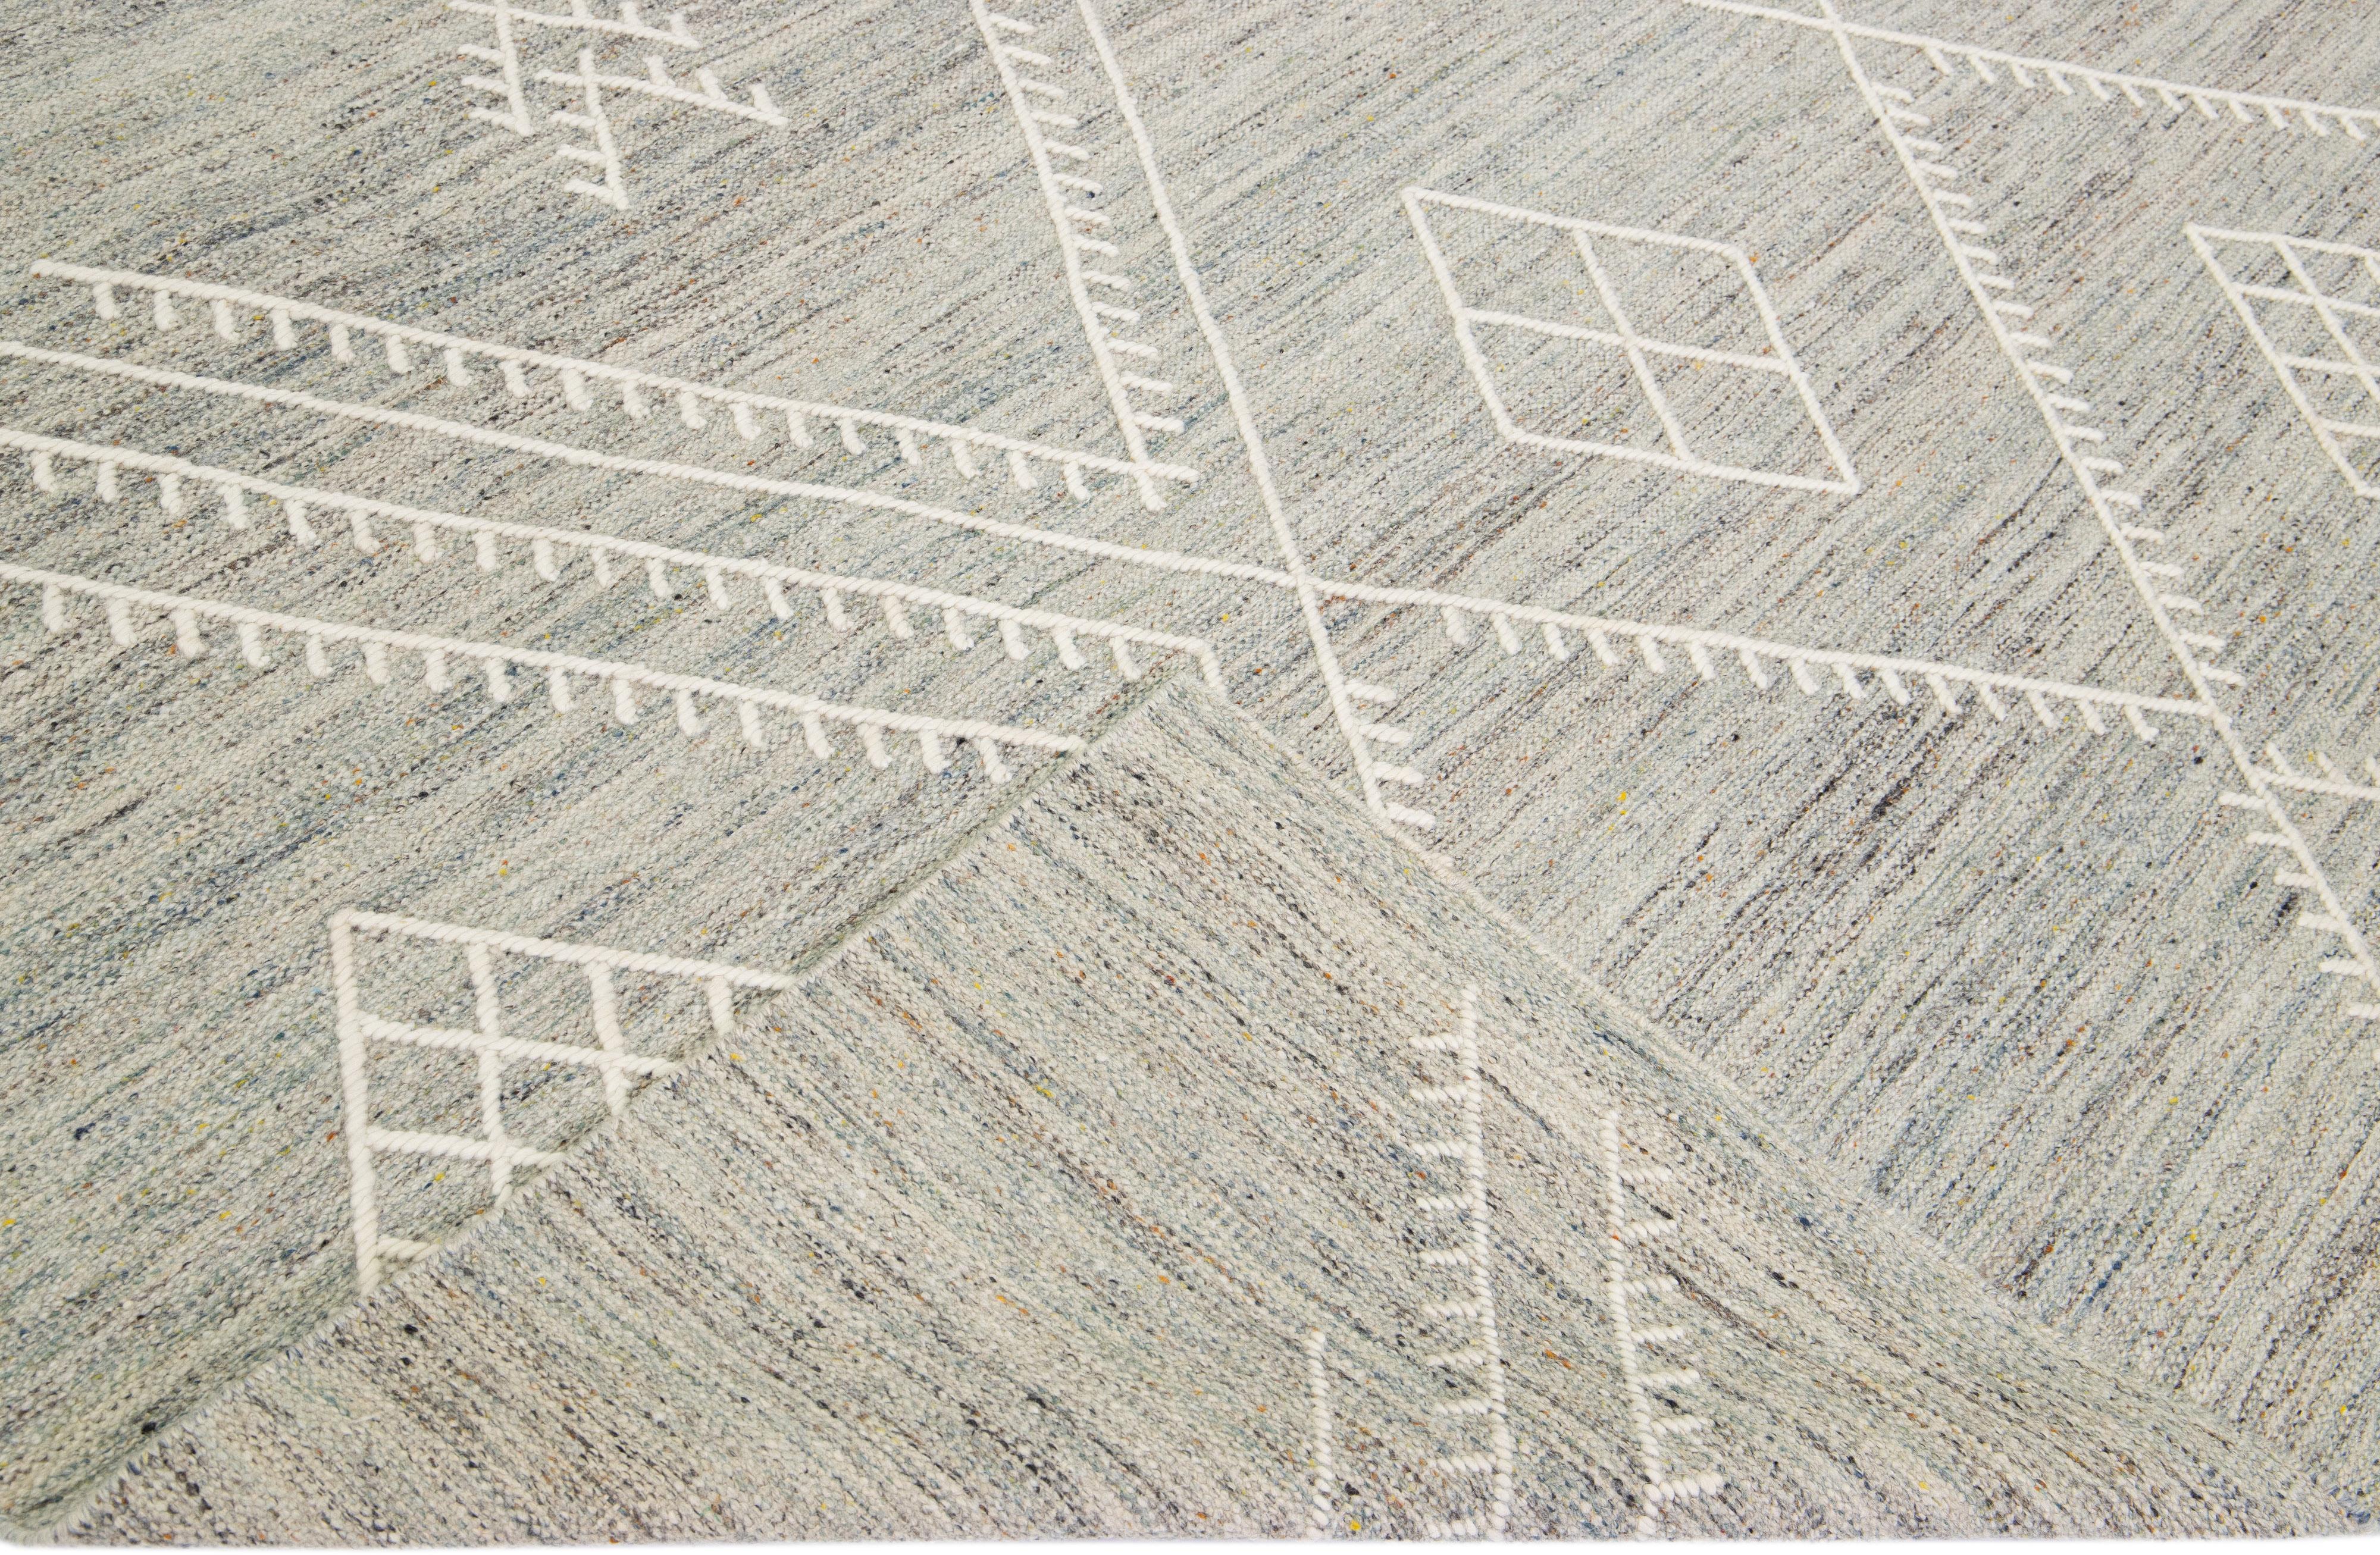 Beautiful kilim handmade wool rug with a gray field. This custom modern flatweave rug part of our Nantucket collection has ivory accents and features a gorgeous all-over geometric coastal design.

This rug measures: 12'2